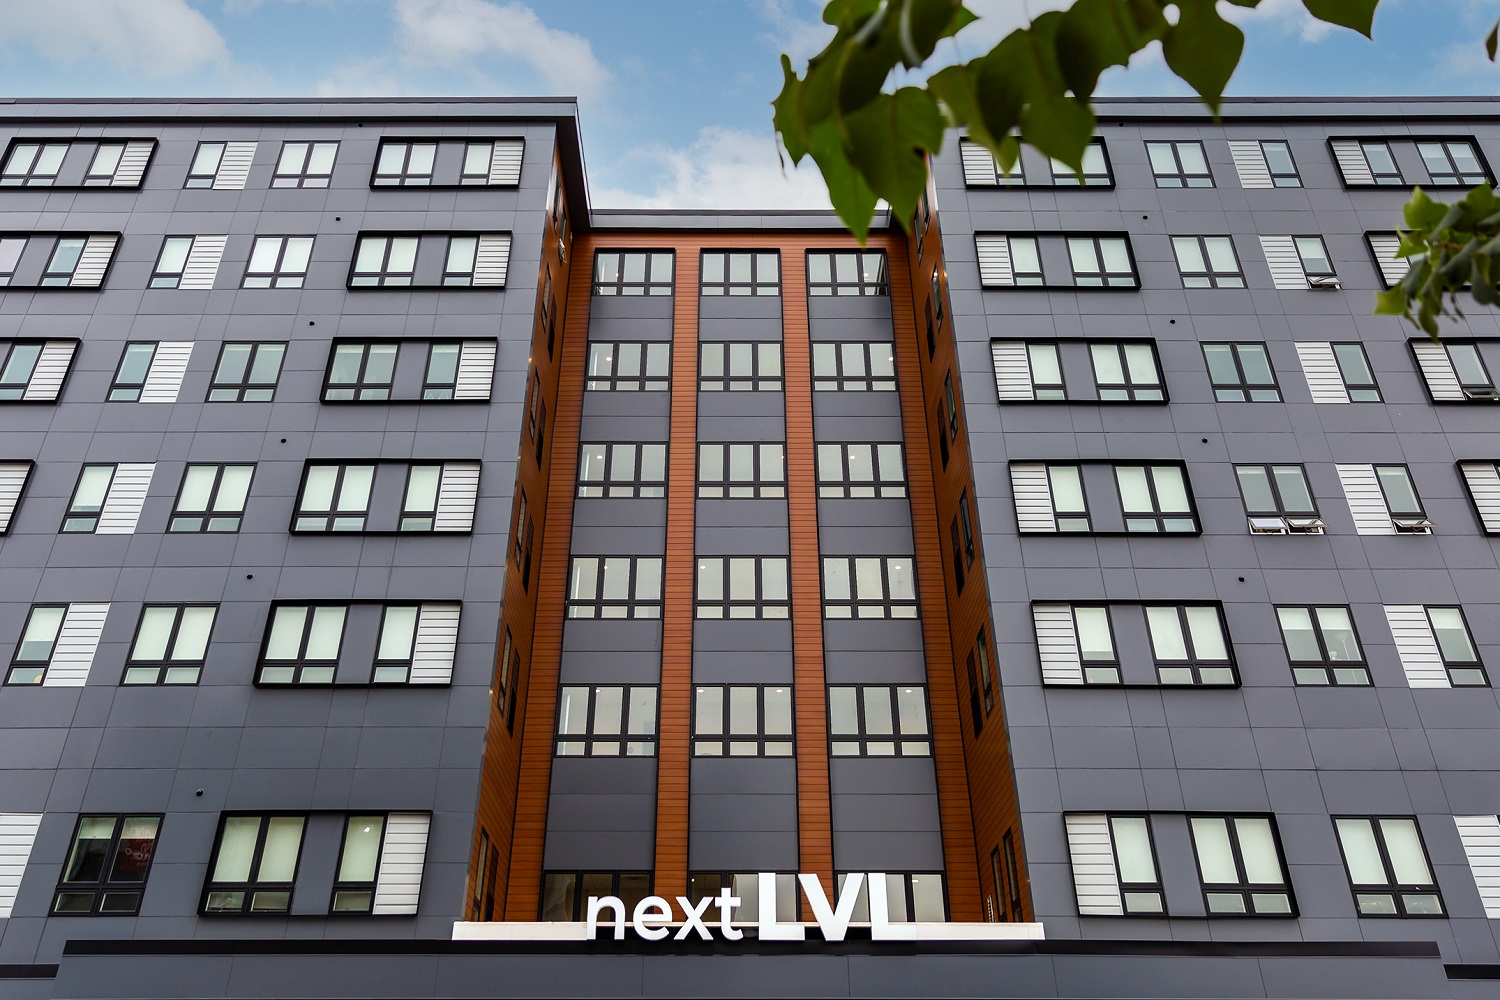 Exterior of a modern multifamily building with contrasting color scheme, sleek blackwindows and no visible HVAC equipment.